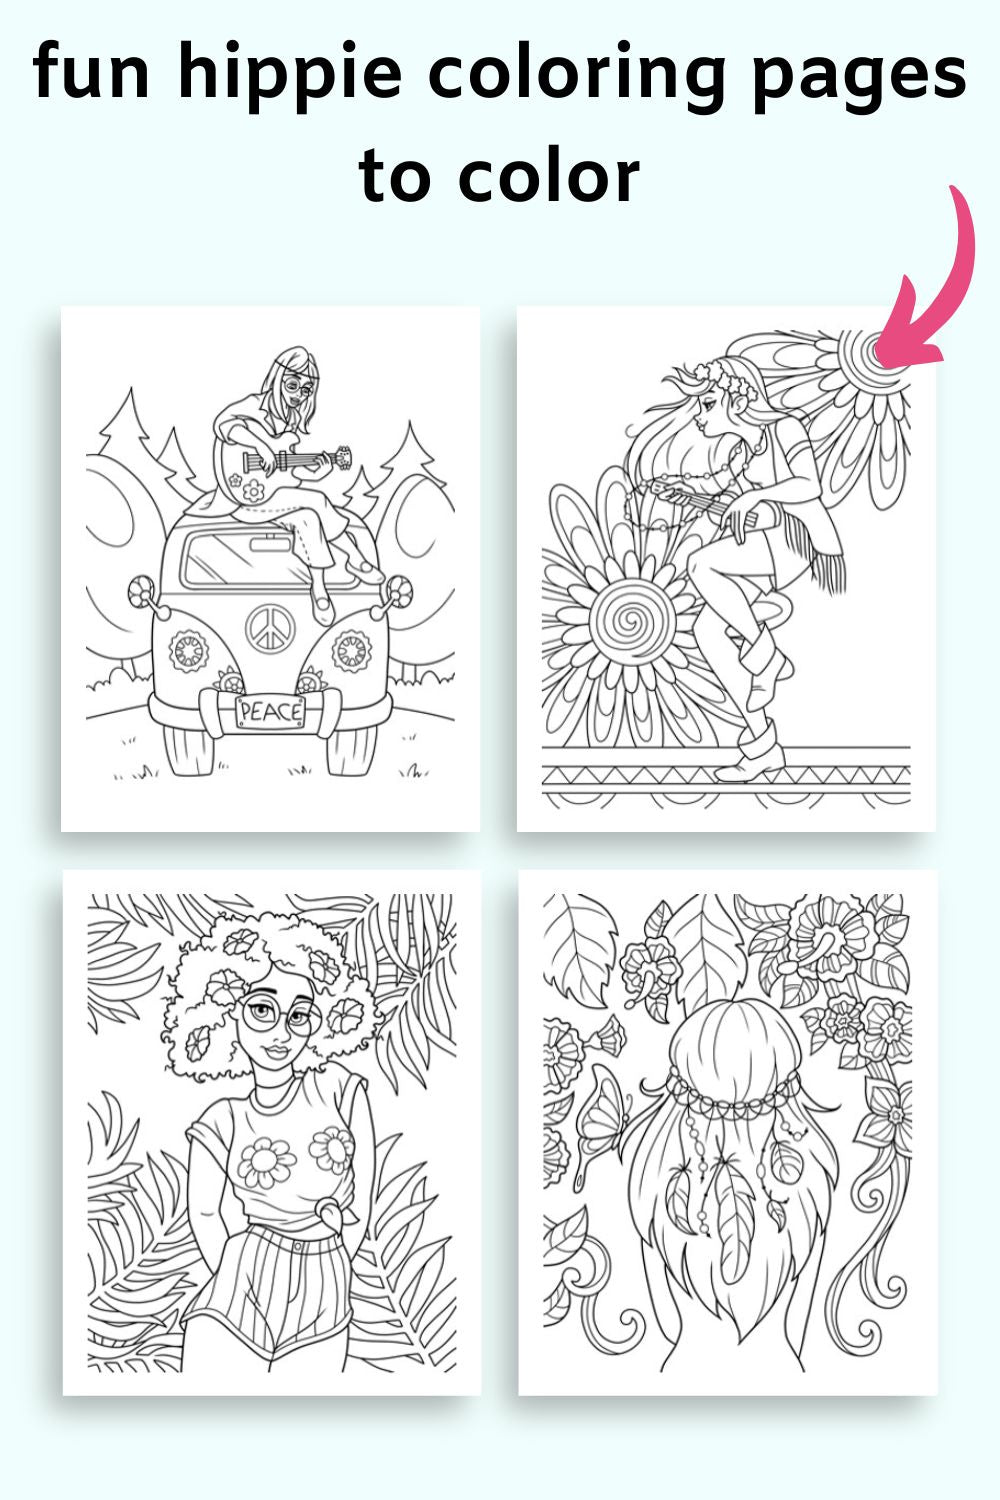 Text "fun hippie coloring pages to color" with an arrow pointing at a preview of four coloring pages. 